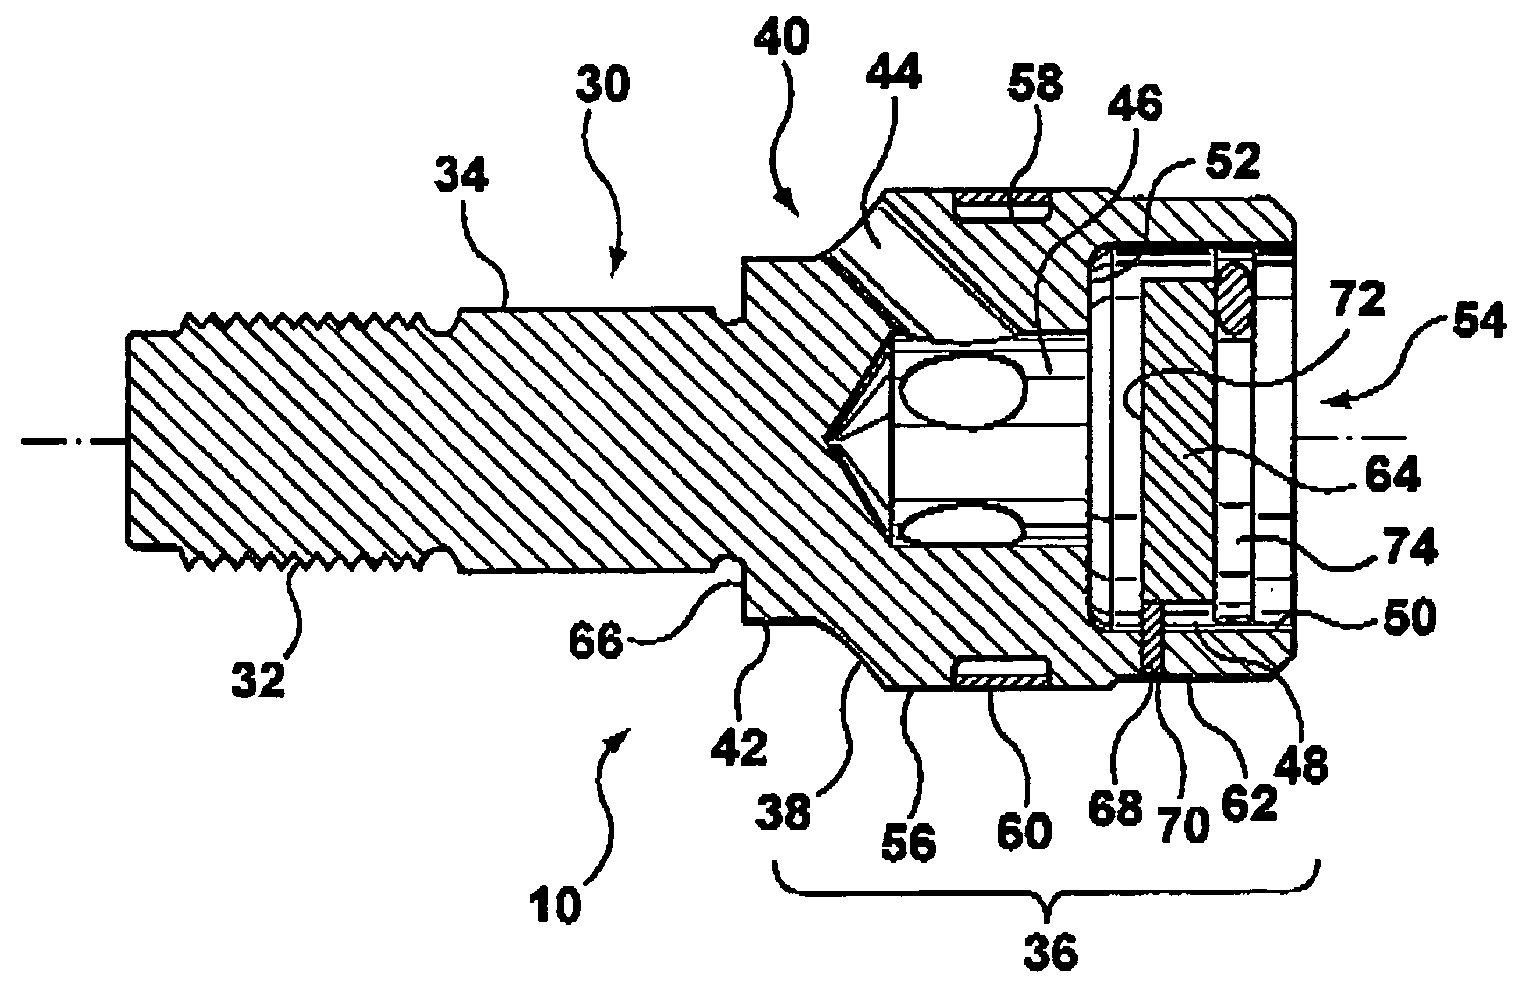 Screw tip and molding system apparatus